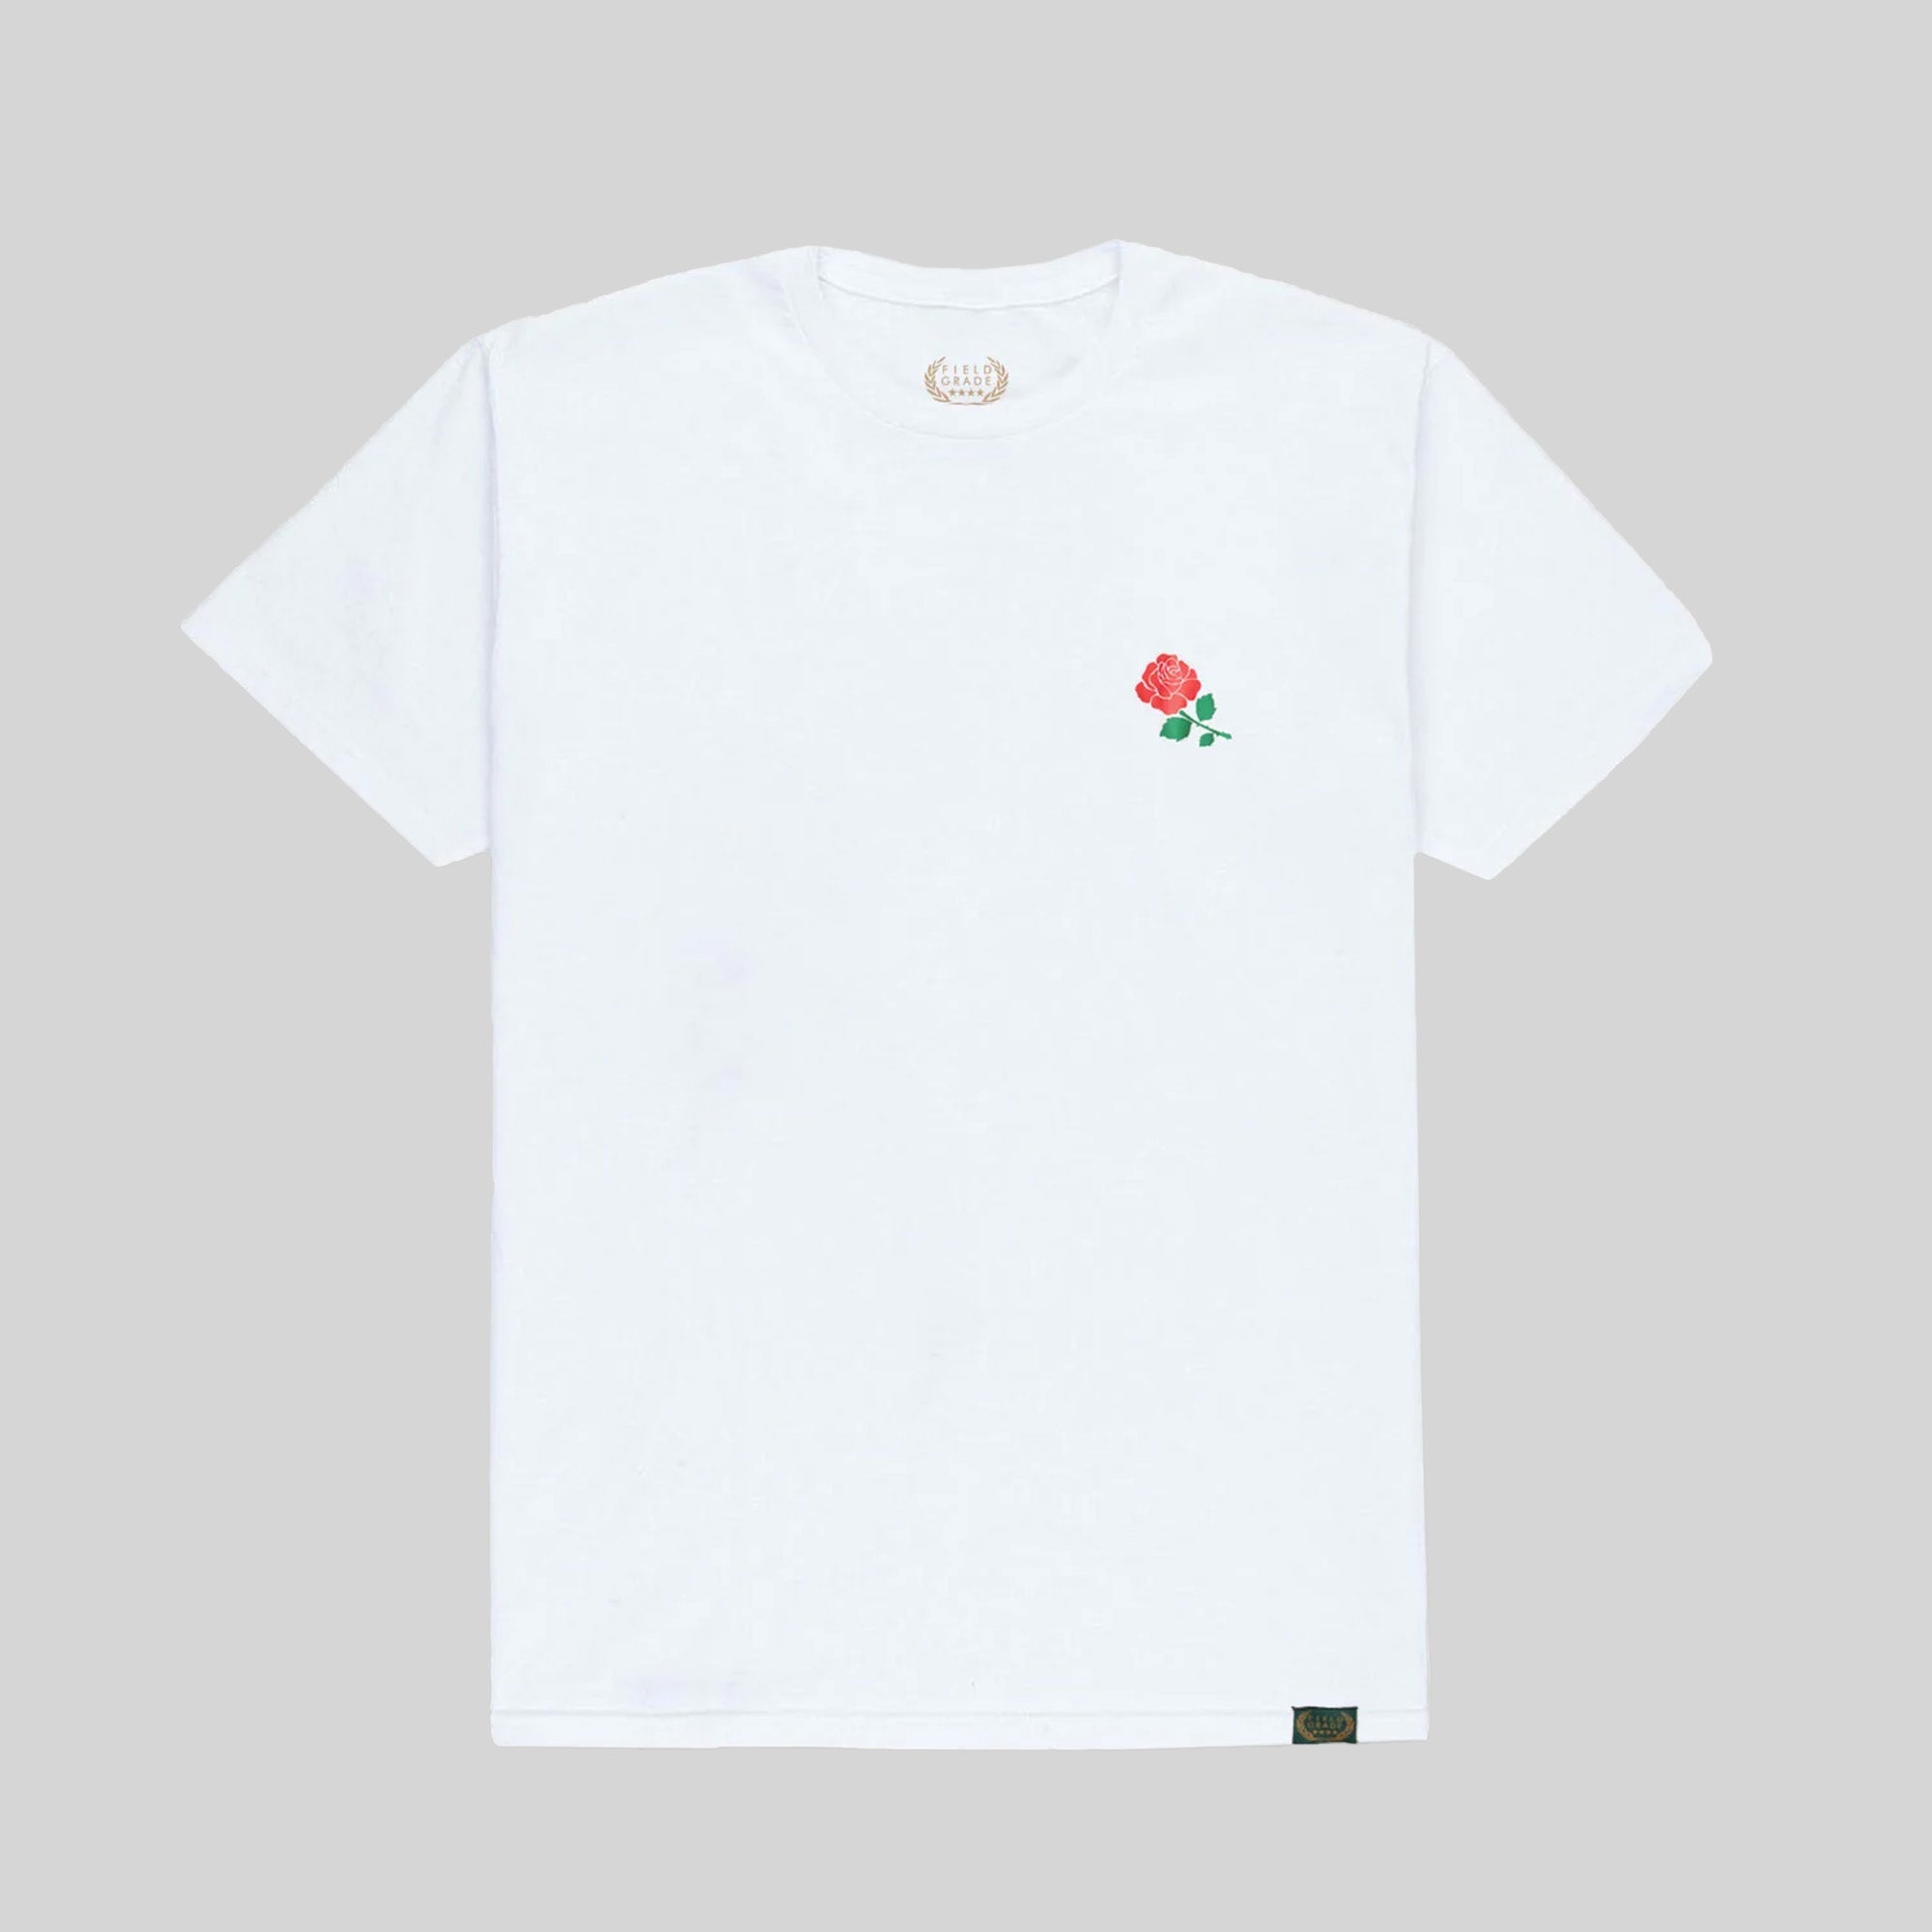 HAVE A NICE DAY - WHITE TEE